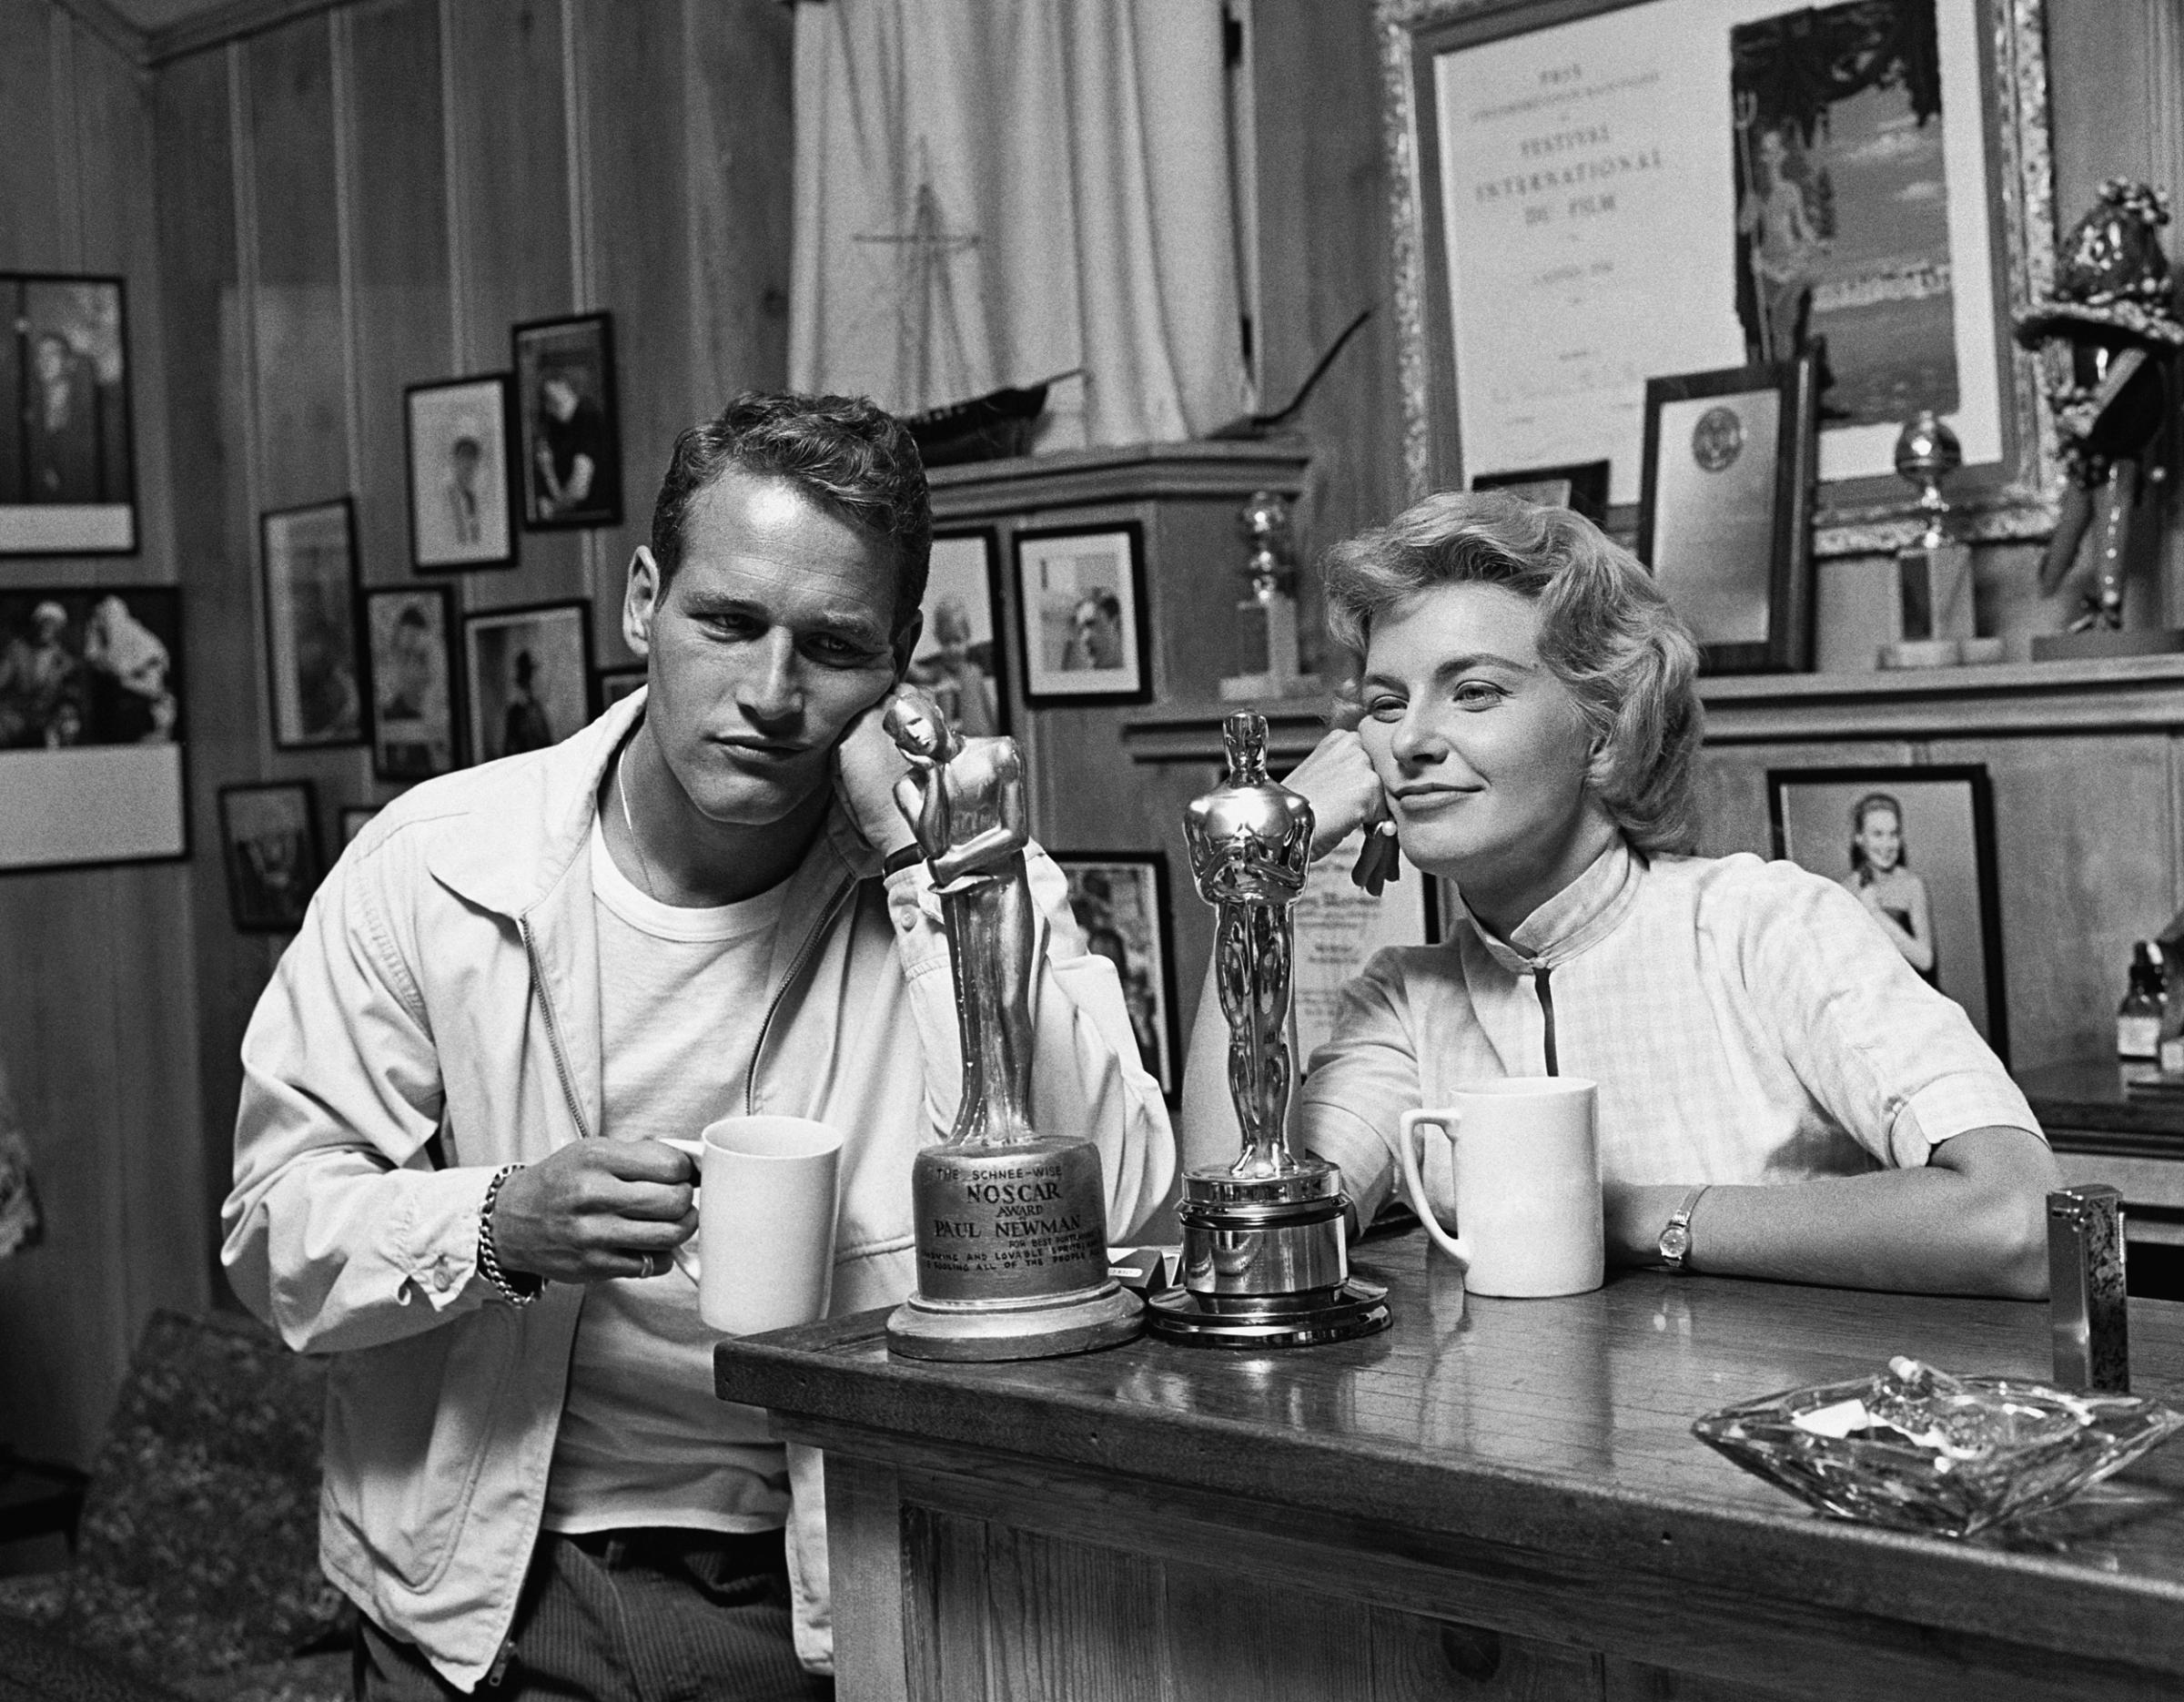 Joanne Woodward won an Oscar for The Three Faces of Eve. Paul Newman had never won an Oscar so Joanne made one for him called "Noscar" (No Oscar) and presented it to him.